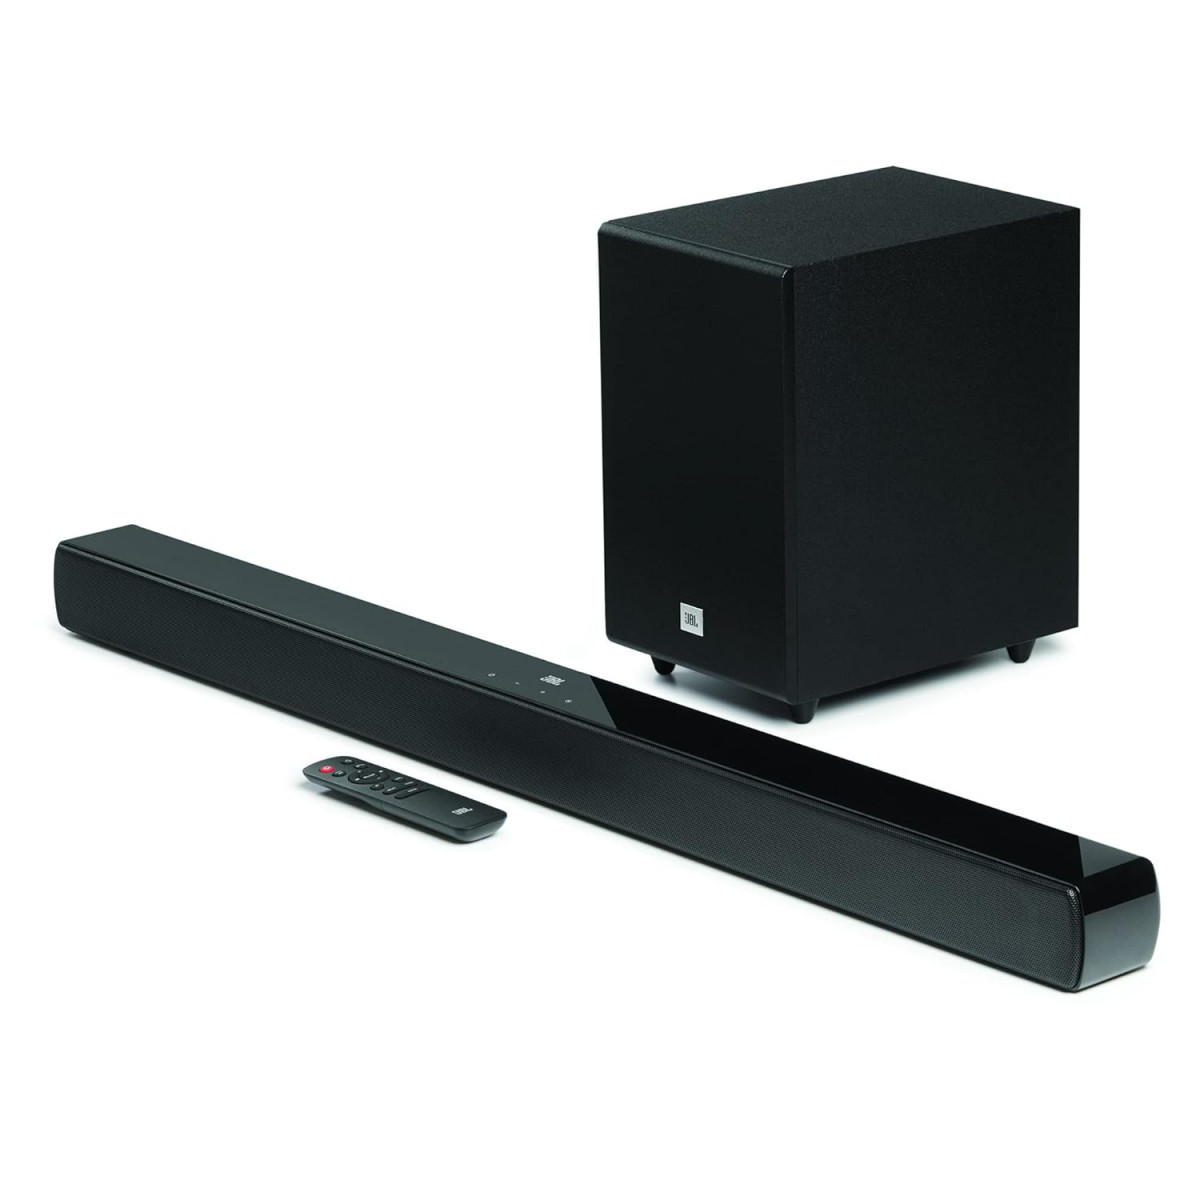 JBL Cinema SB241 Dolby Digital Soundbar with Wired Subwoofer for Extra Deep Bass 21 Channel Home Theatre with Remote HDMI ARC Bluetooth  Optical Connectivity 110W